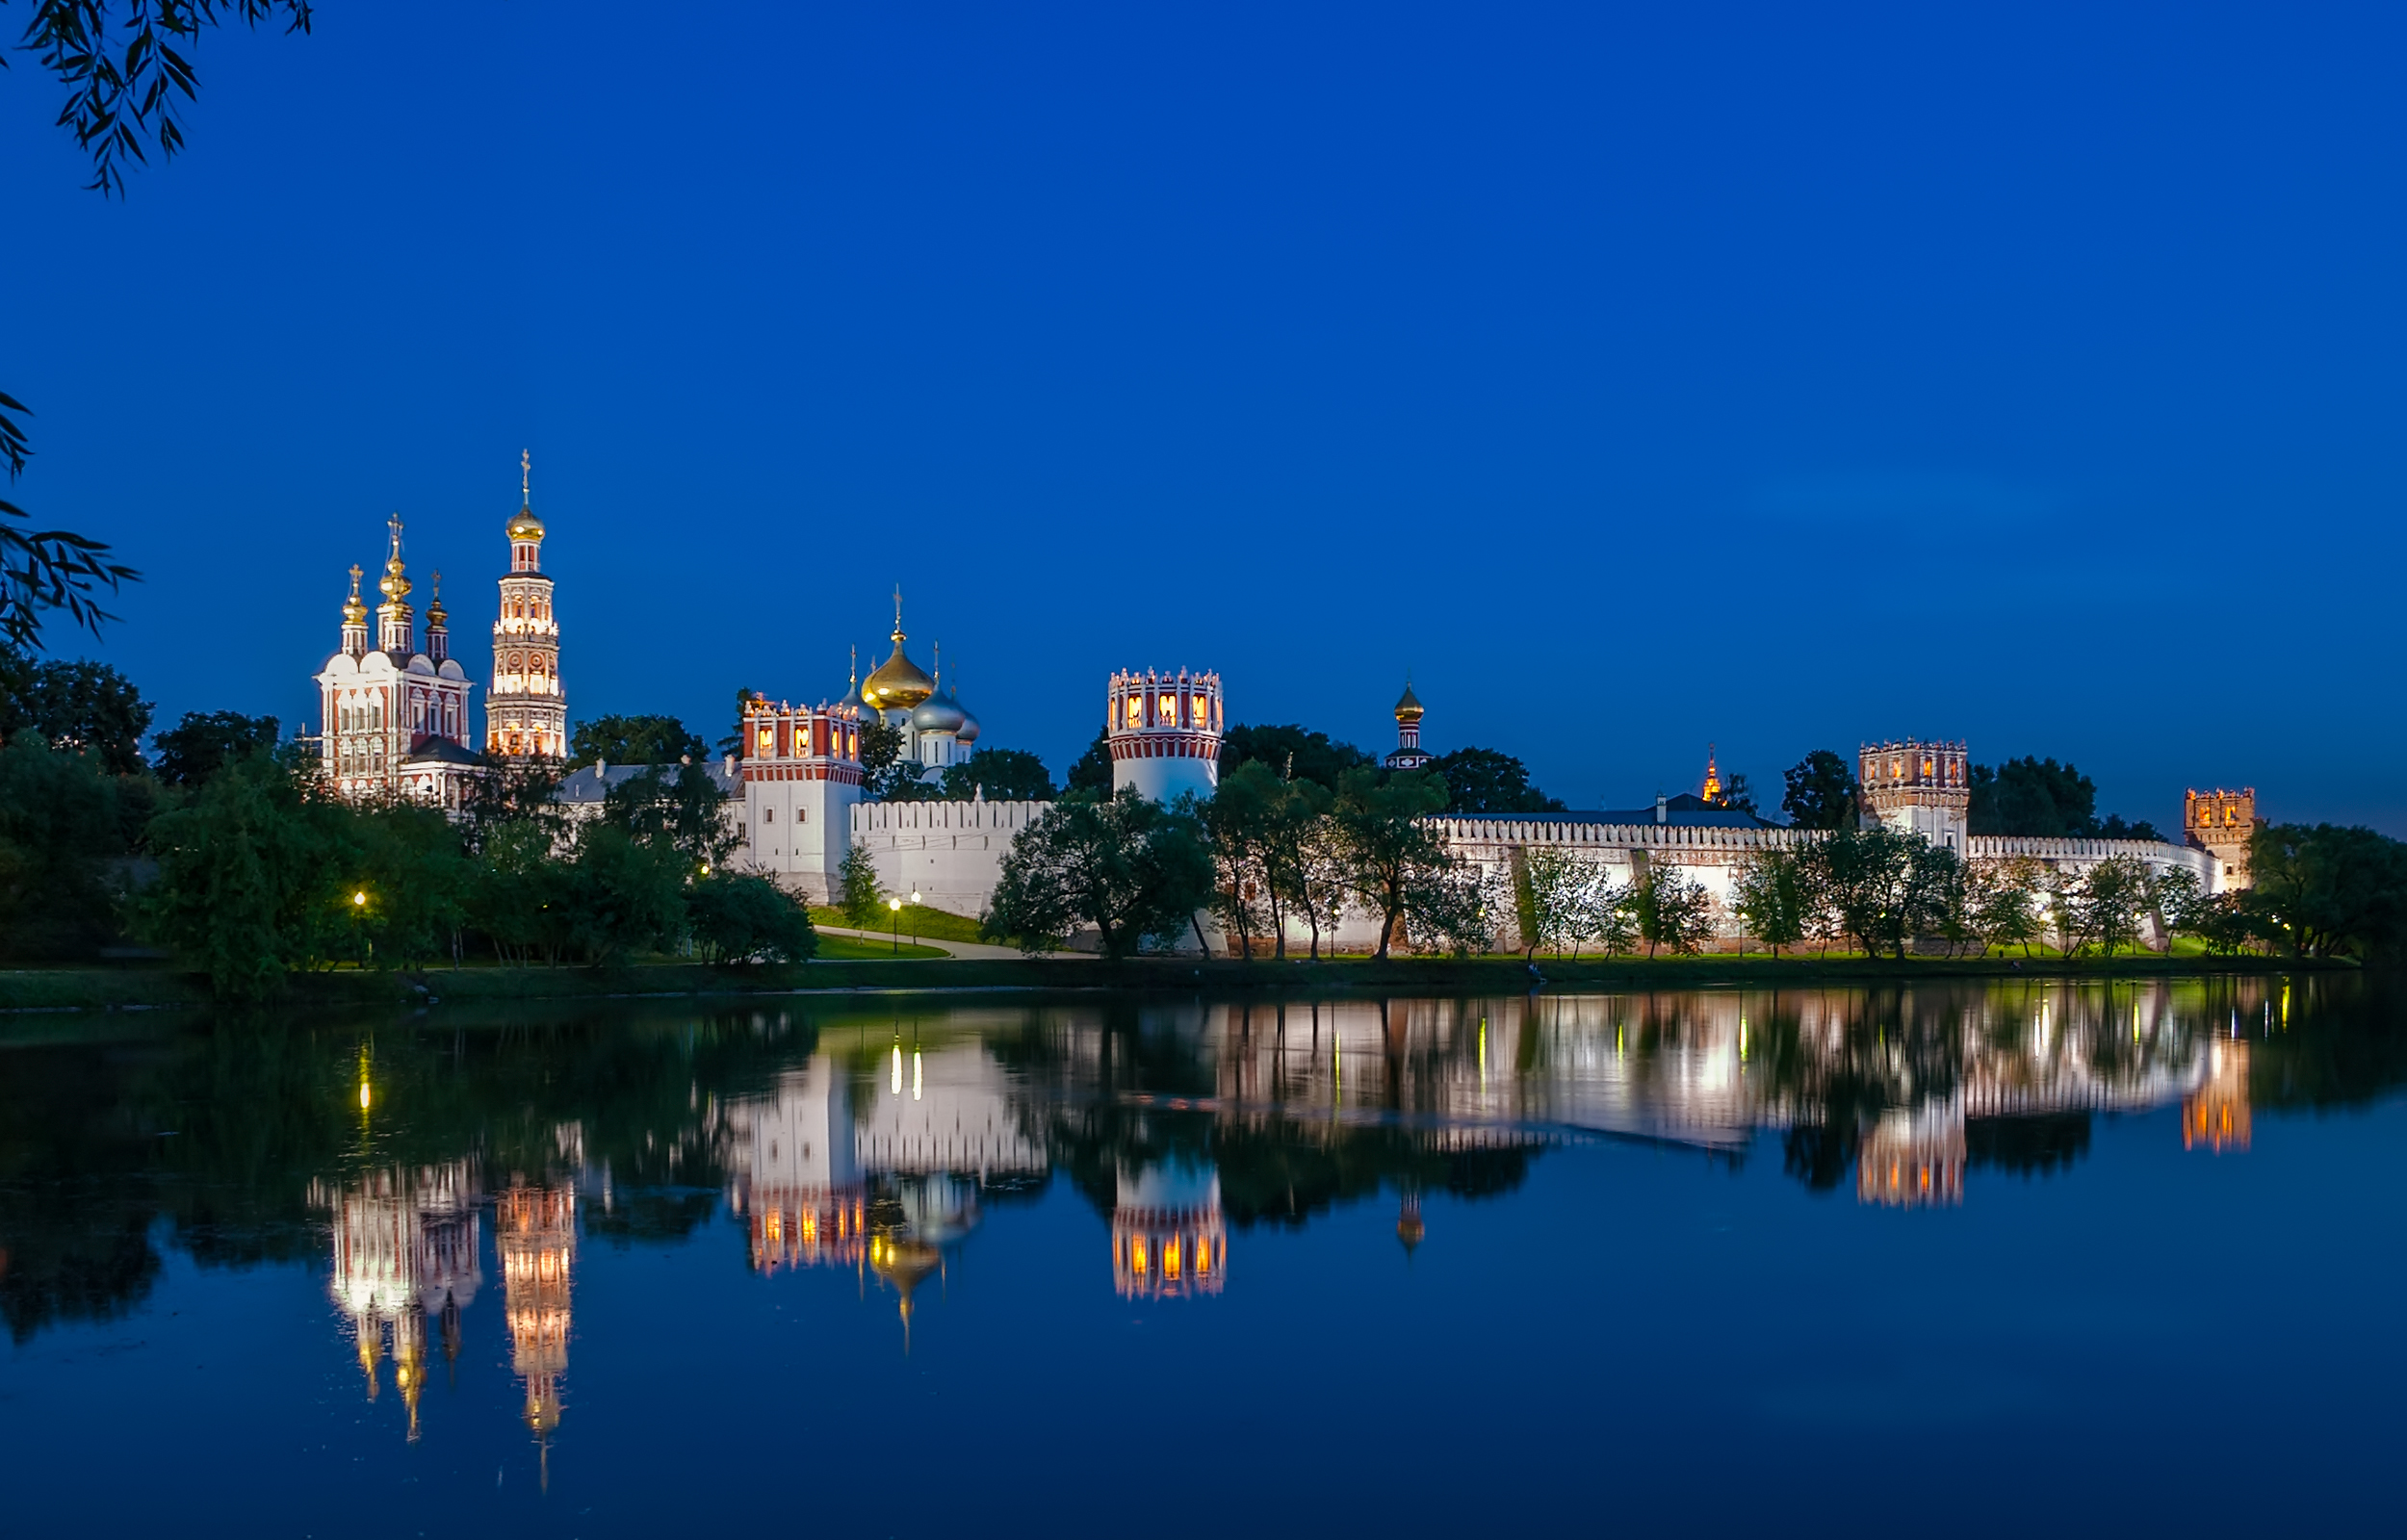 Novodevichy Convent Russia 2 Novodevichy Convent, Russia Beautiful Global